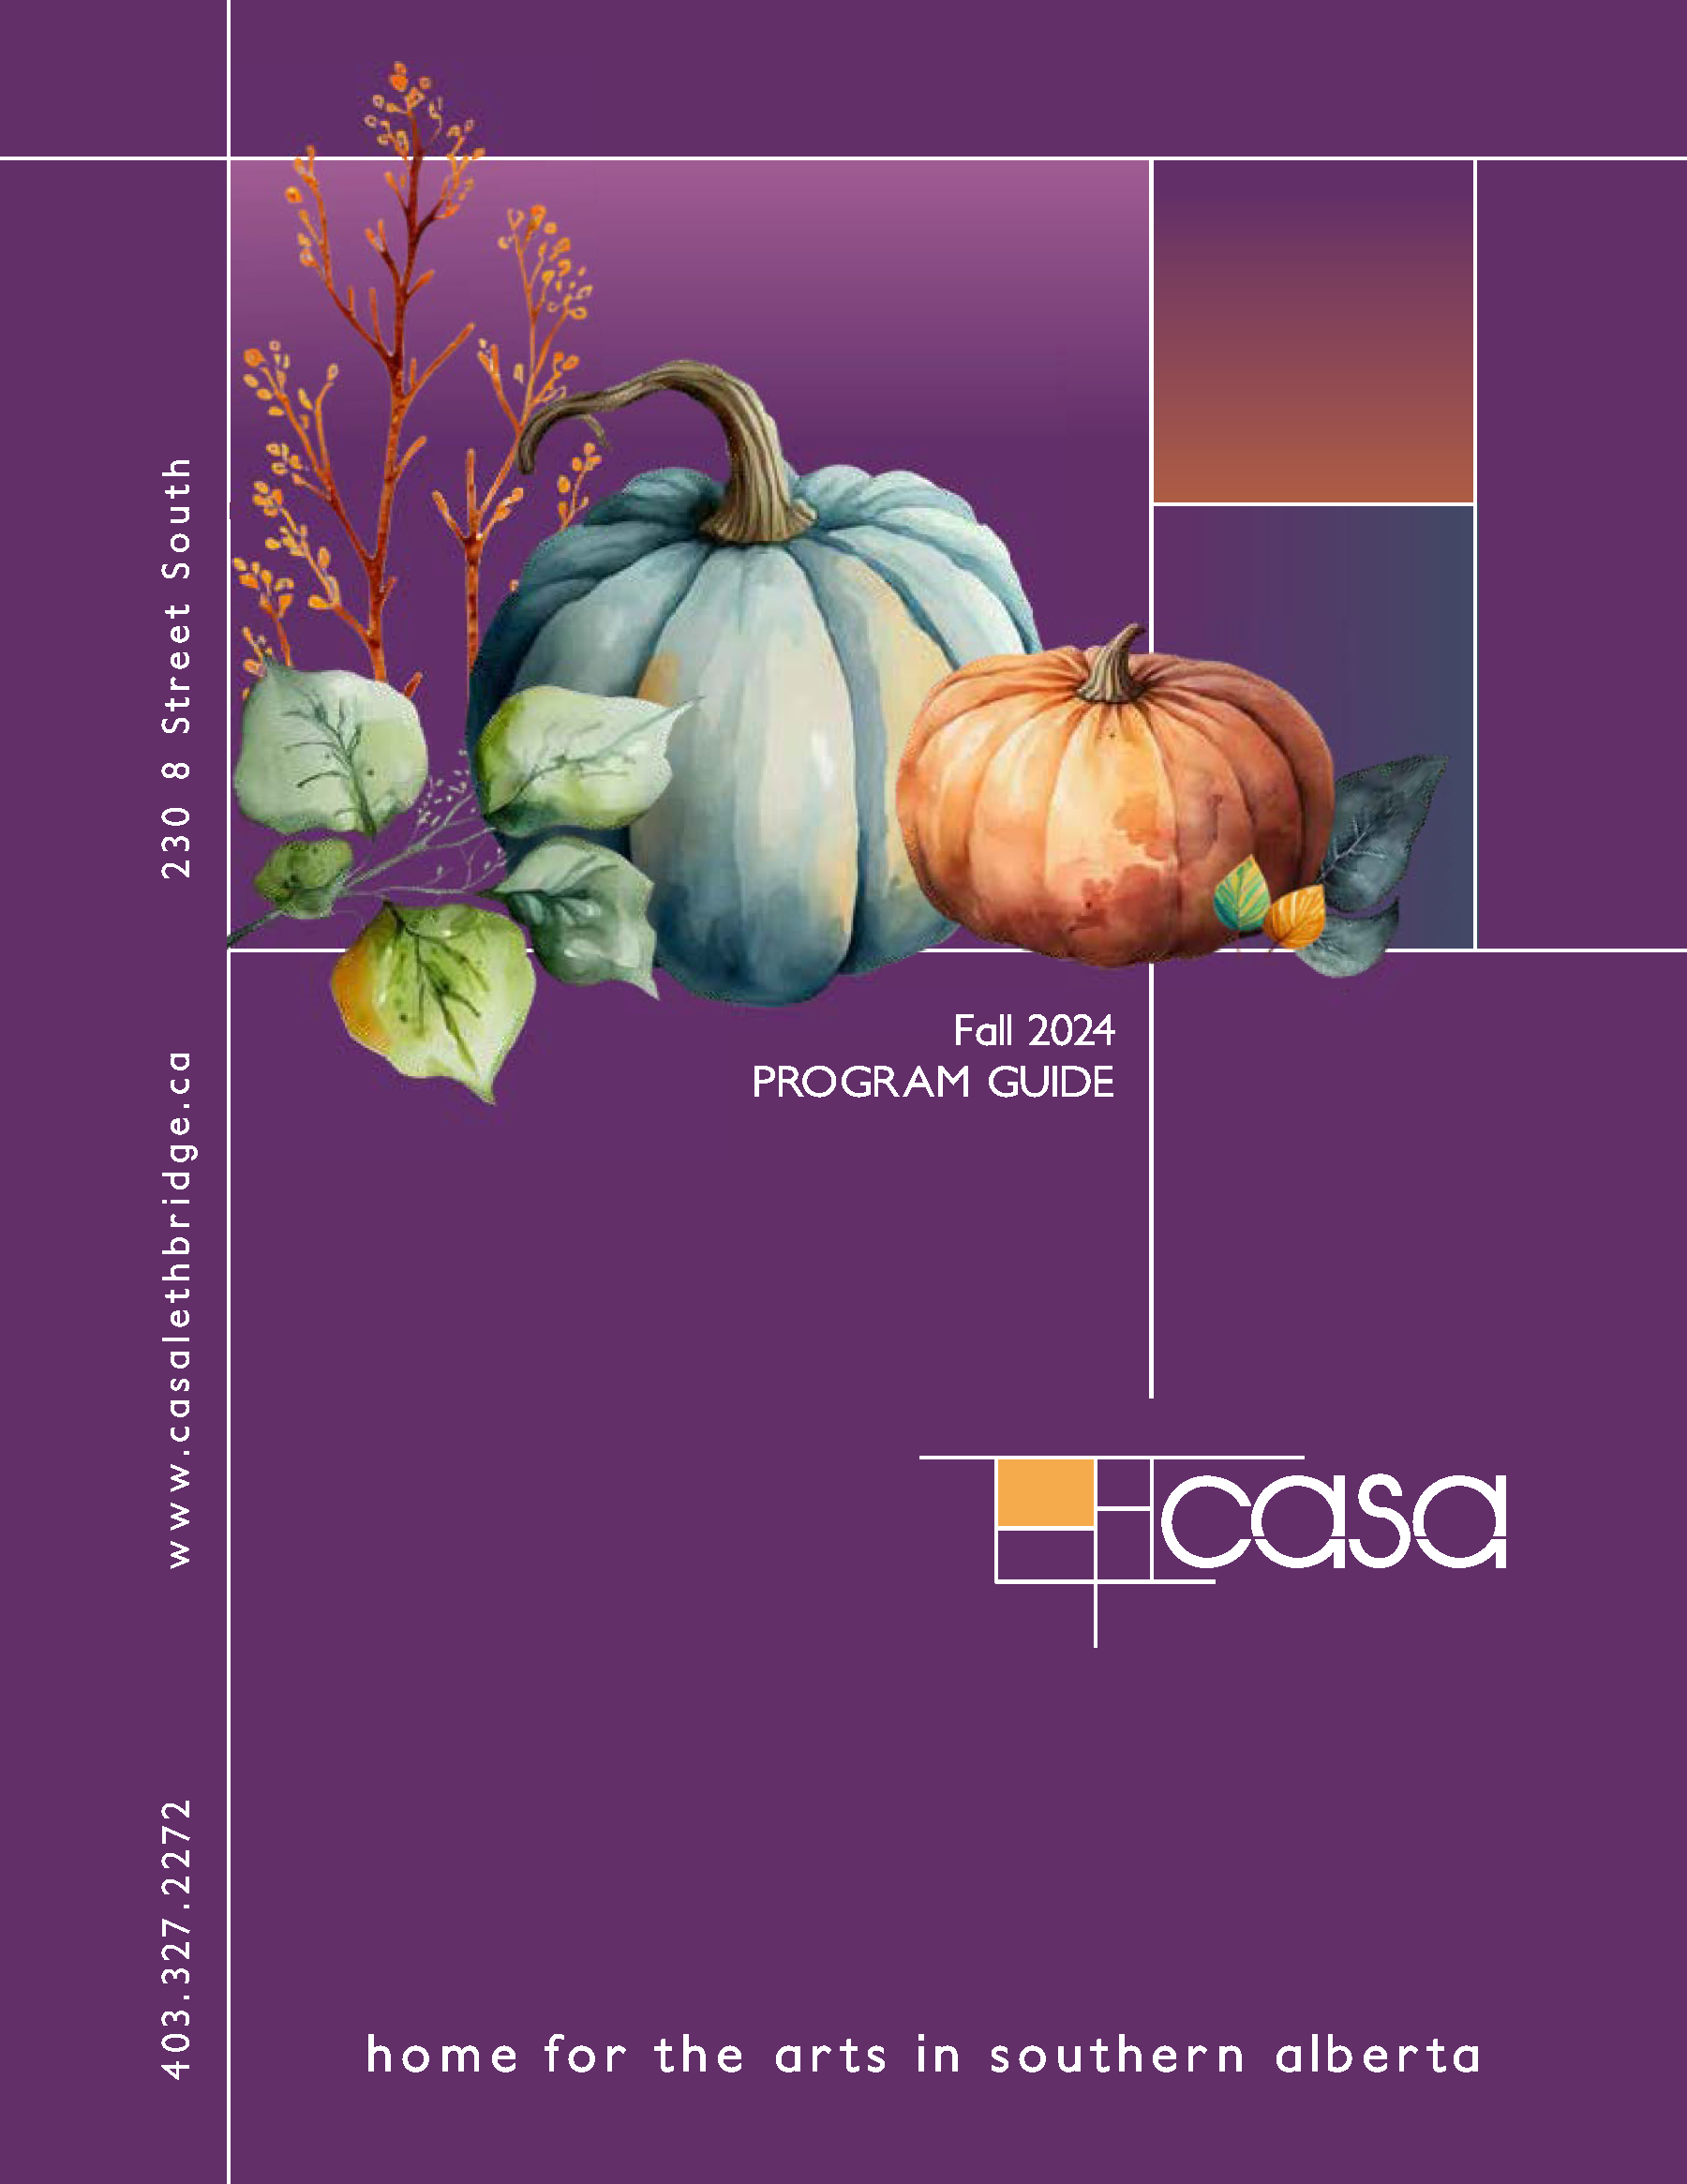 Image of the cover of the Call Fall Program guide 2024 that is purple with watercolour pumpkins